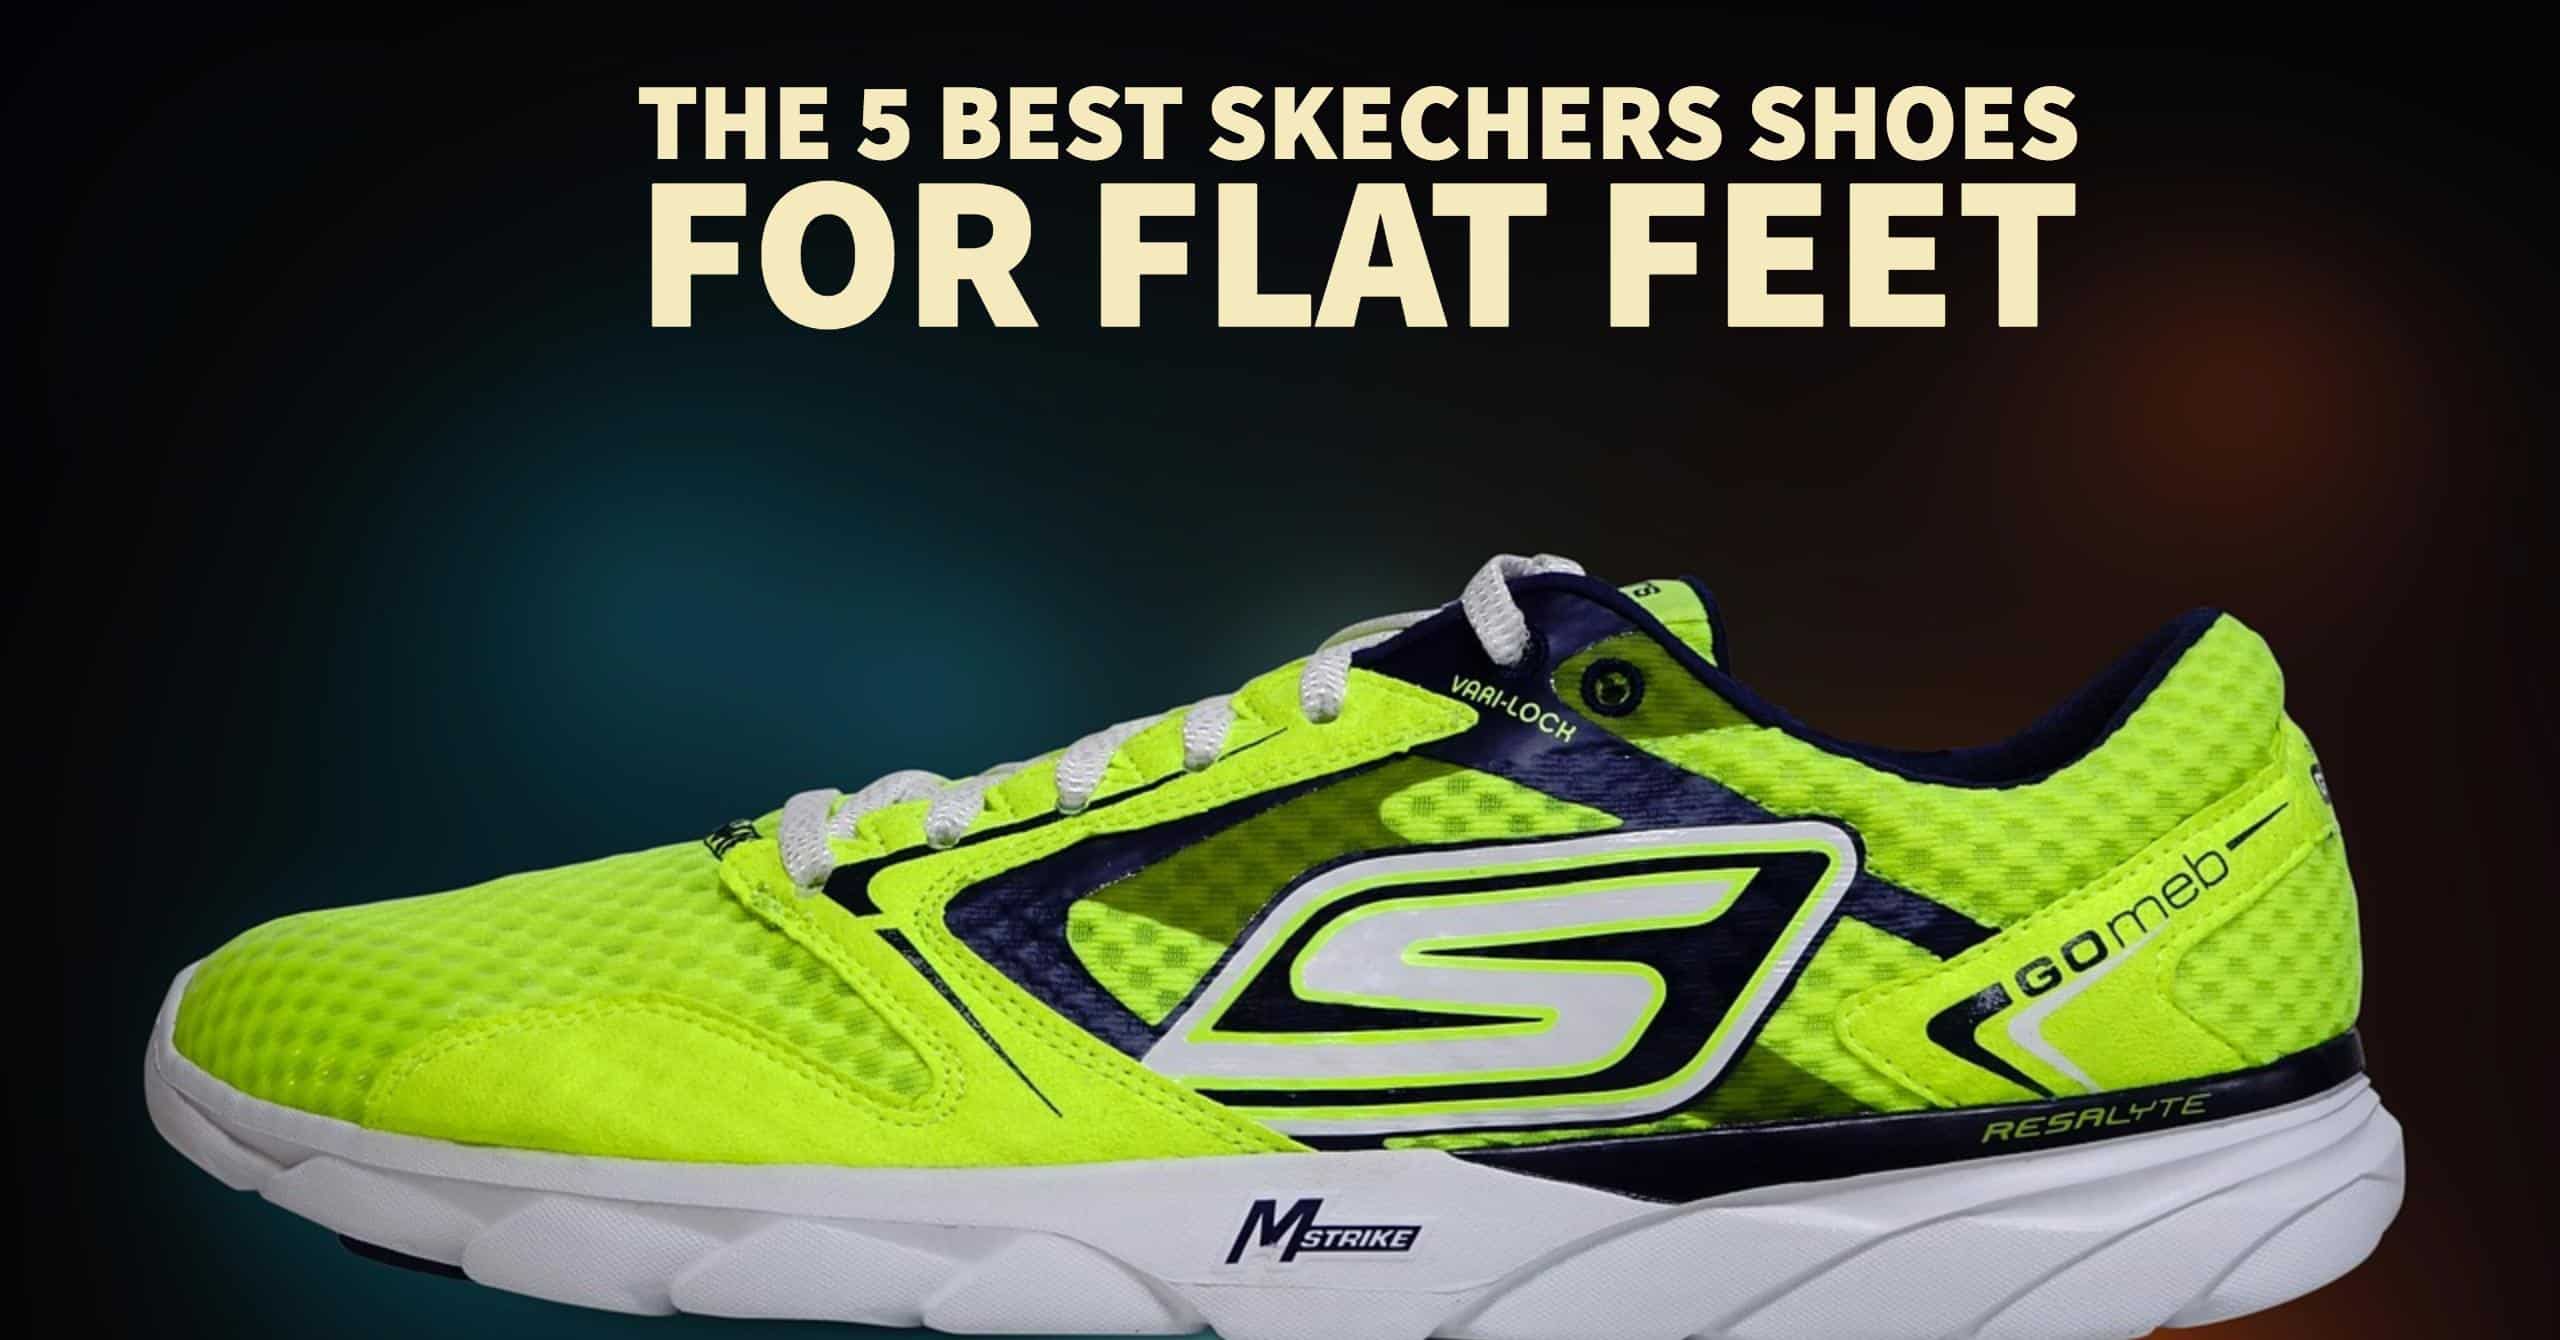 The 5 Best Skechers Shoes for Flat Feet